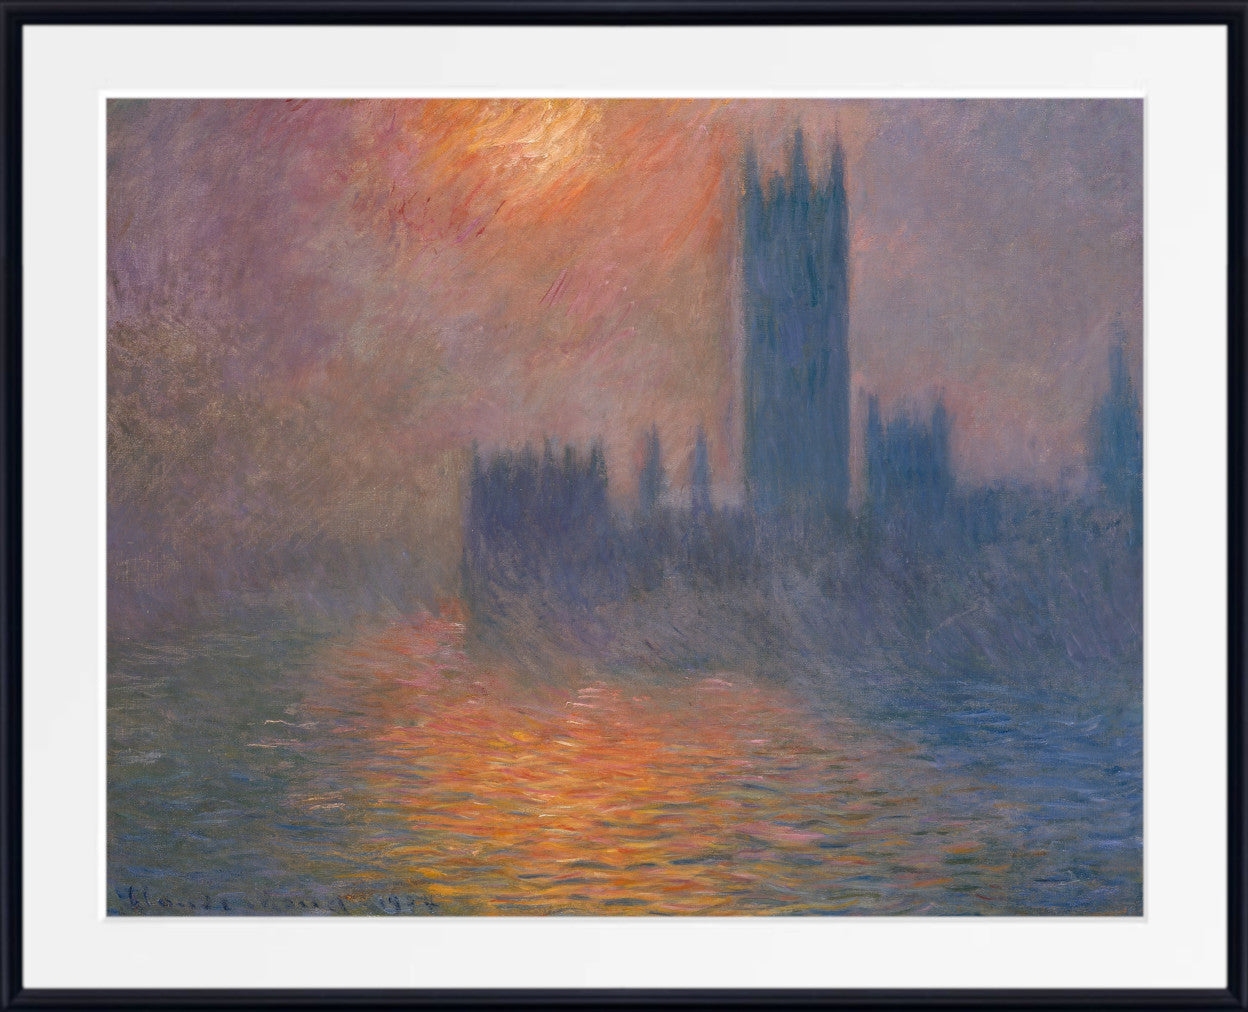 Houses of Parliament at sunset by Claude Monet